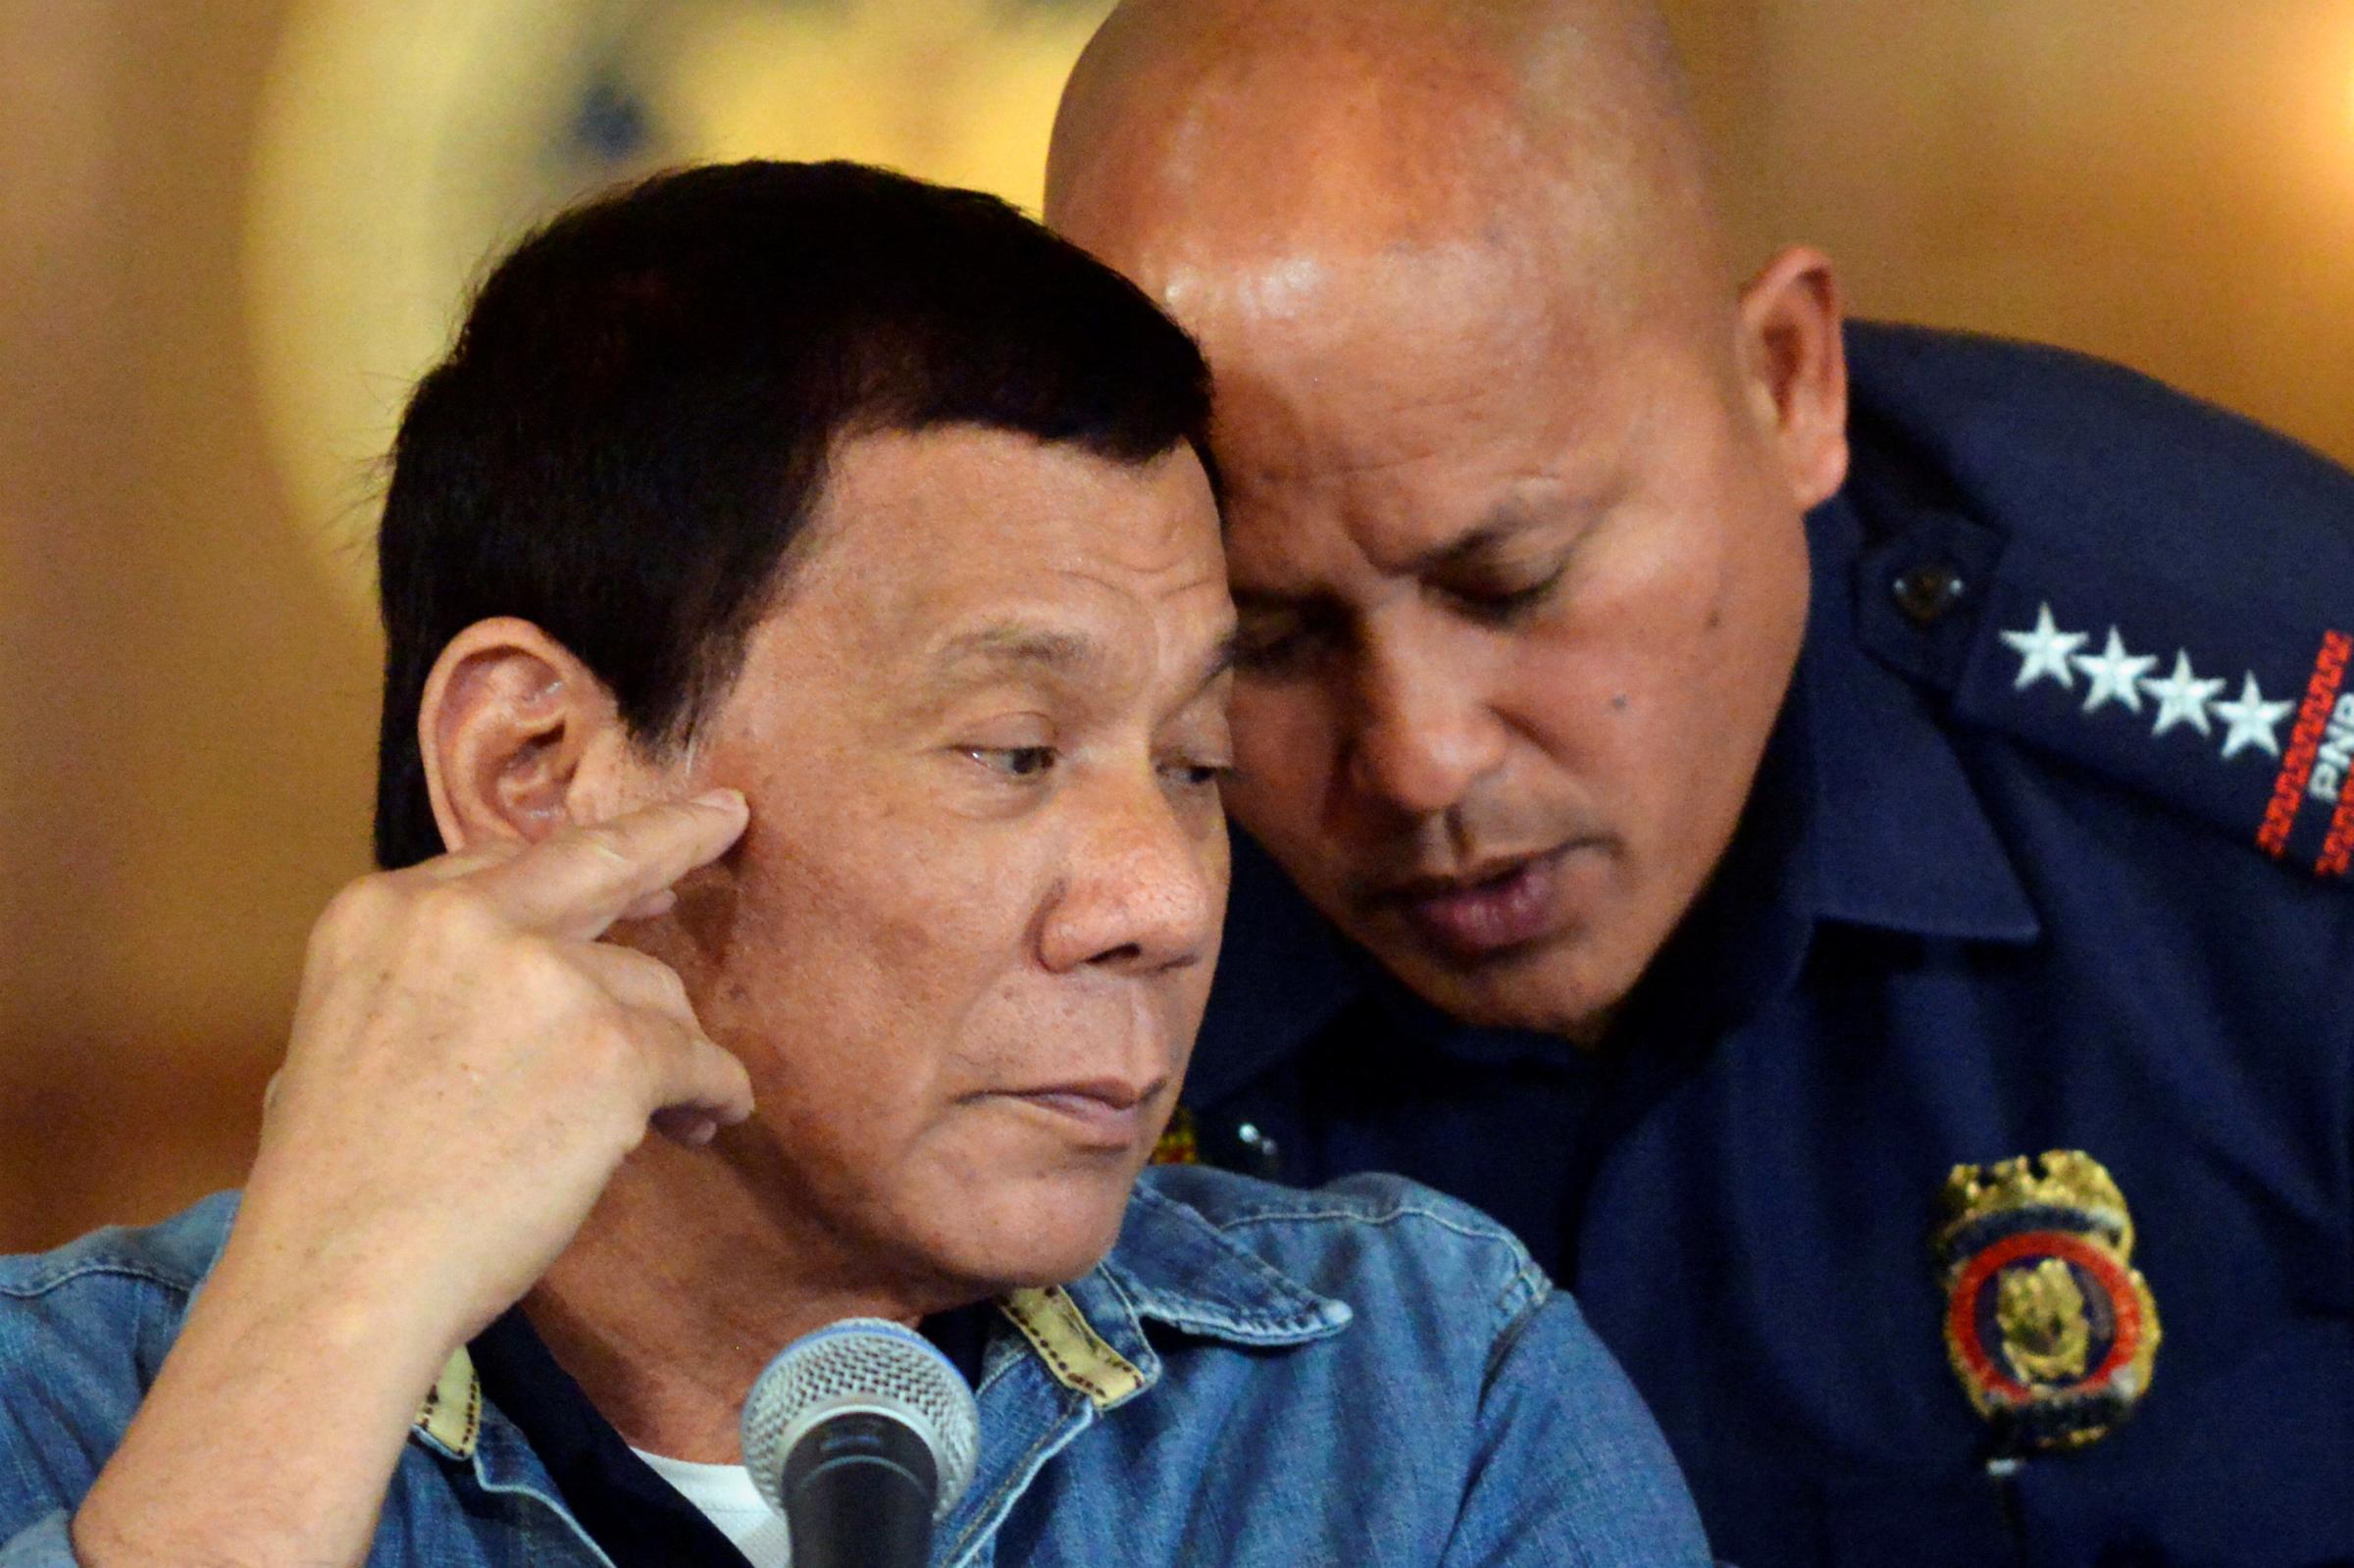 Philippine President Rodrigo Duterte listens as PNP Director General Ronald Dela Rosa whispers to him, during a late night news conference at the presidential palace in Manila